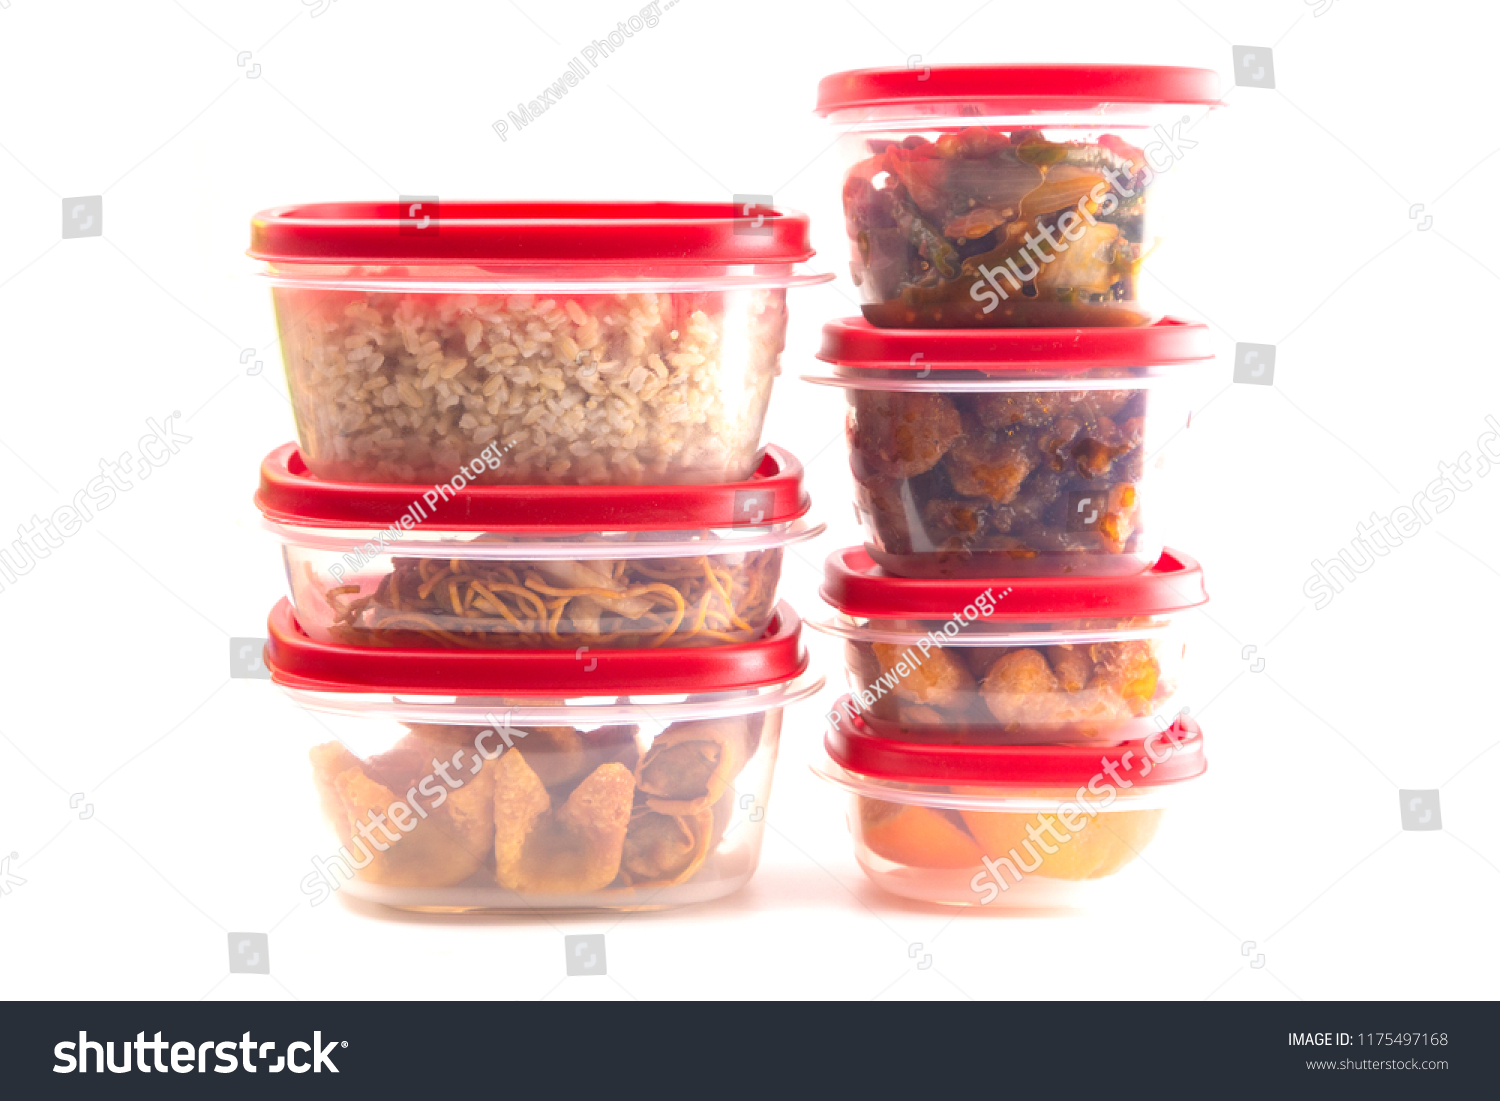 Stock Photo Boxes With Red Lids Filled With Leftover Food 1175497168 